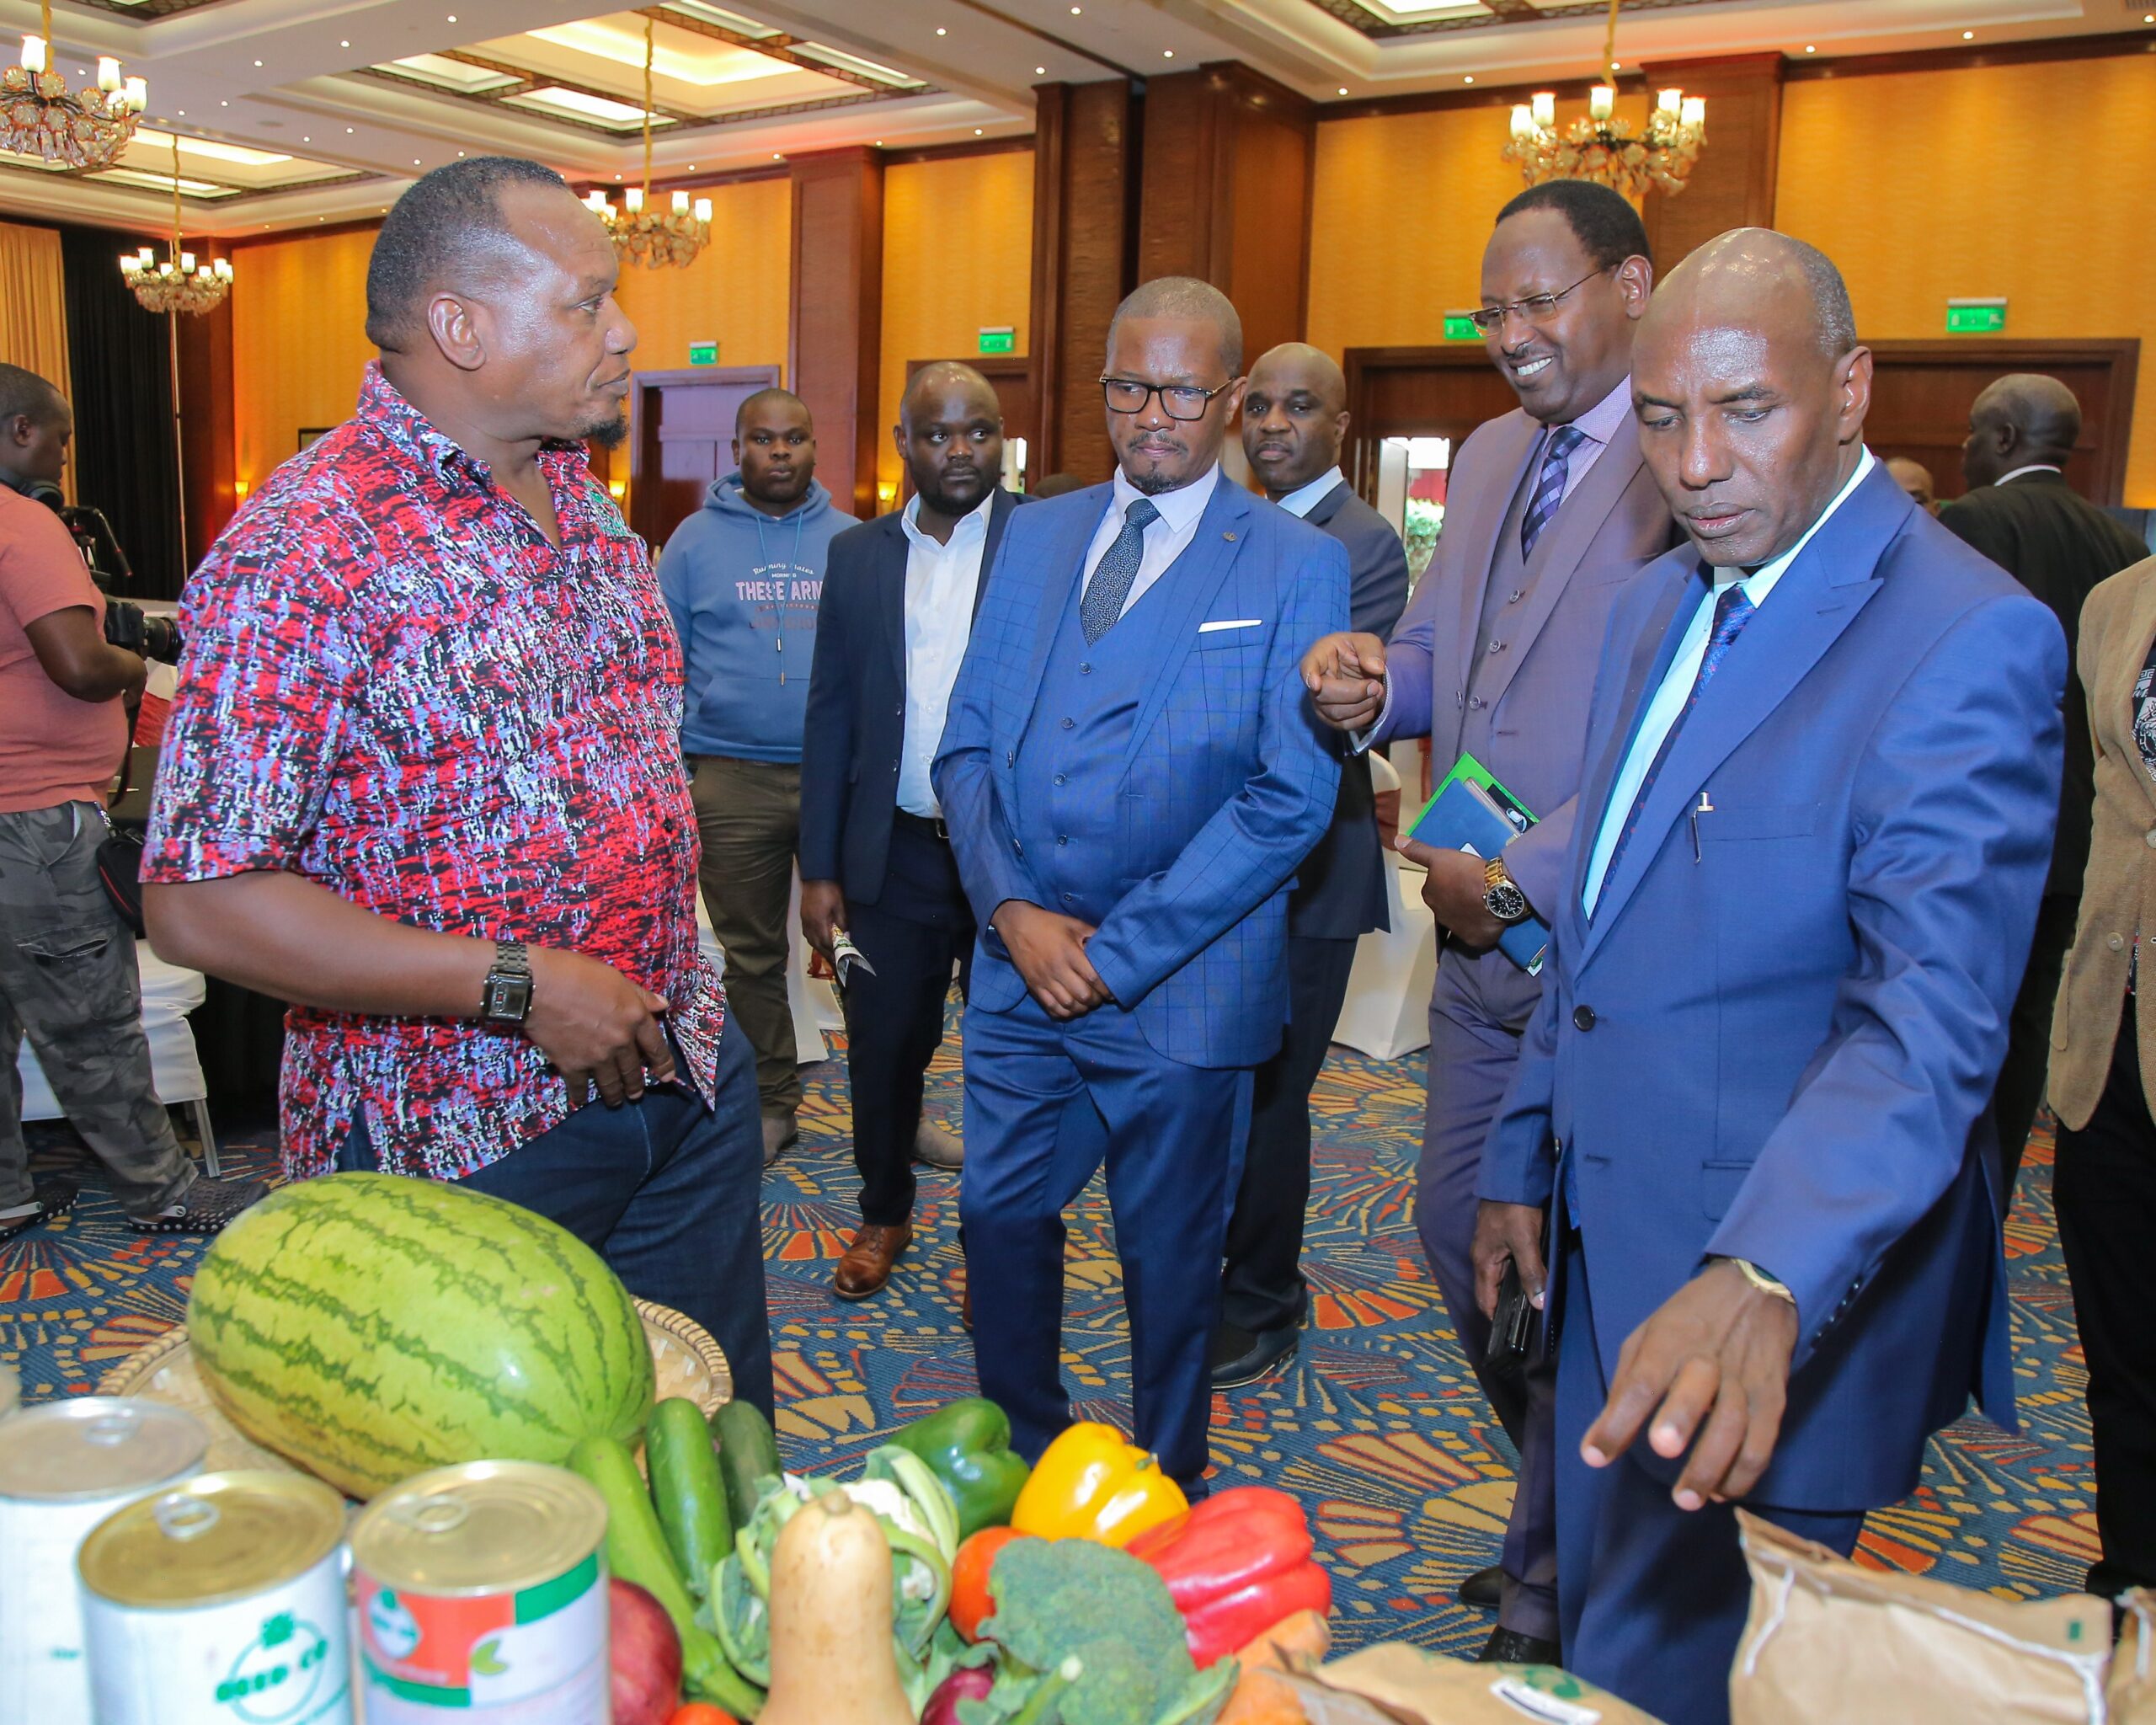 KBL Will Teach 60,000 Farmers On Sustainable & Regenerative AGRICULTURAL Practices